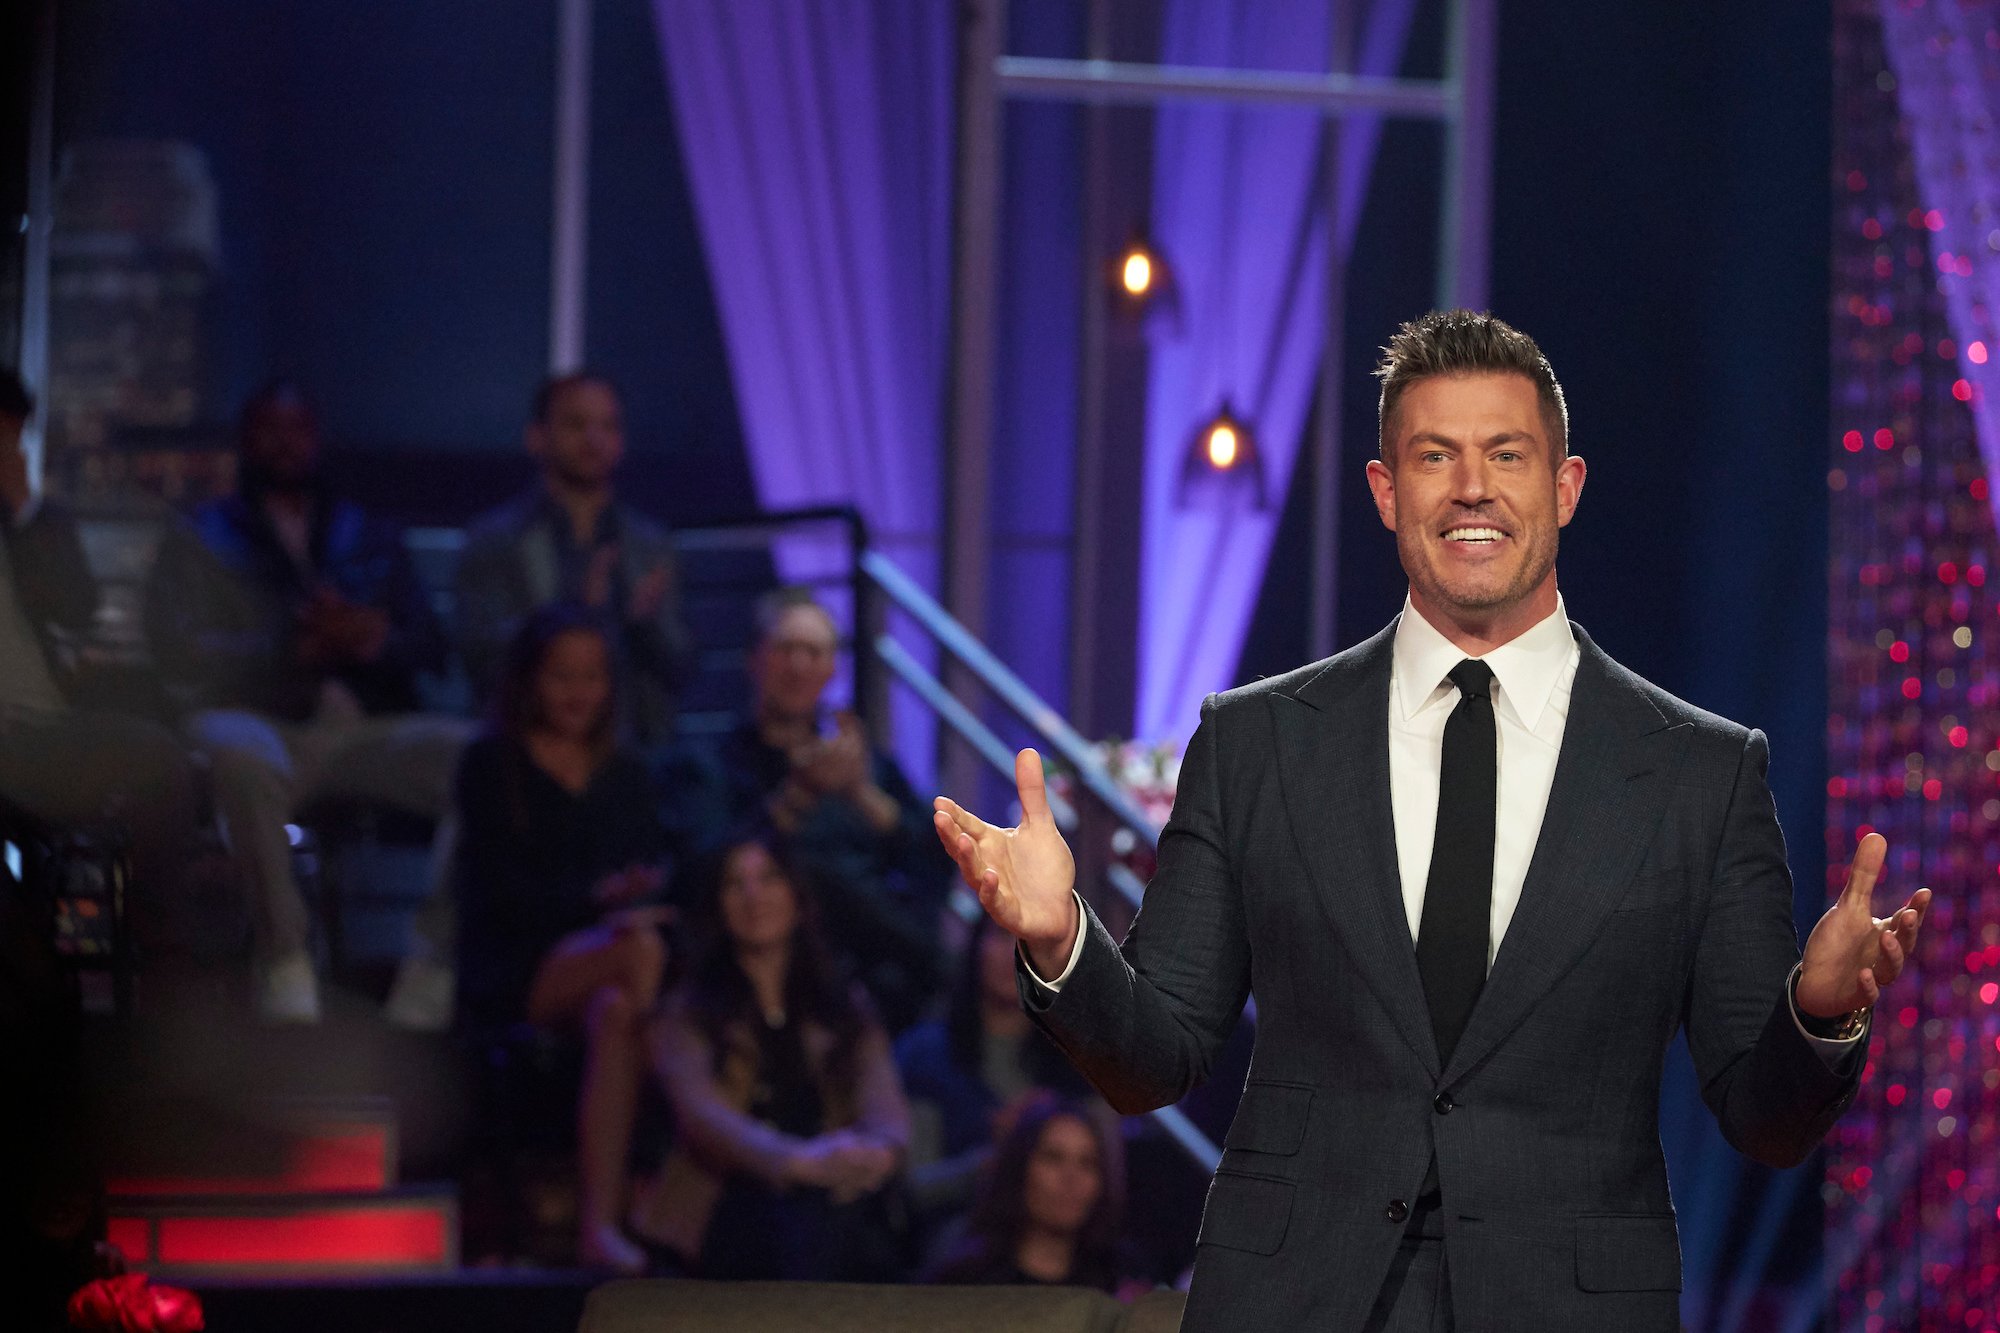 'The Bachelor' host Jesse Palmer seen wearing a suit at the 'Women Tell All,' breaks down what happened that night with 'The Bachelor' Clayton Echard.